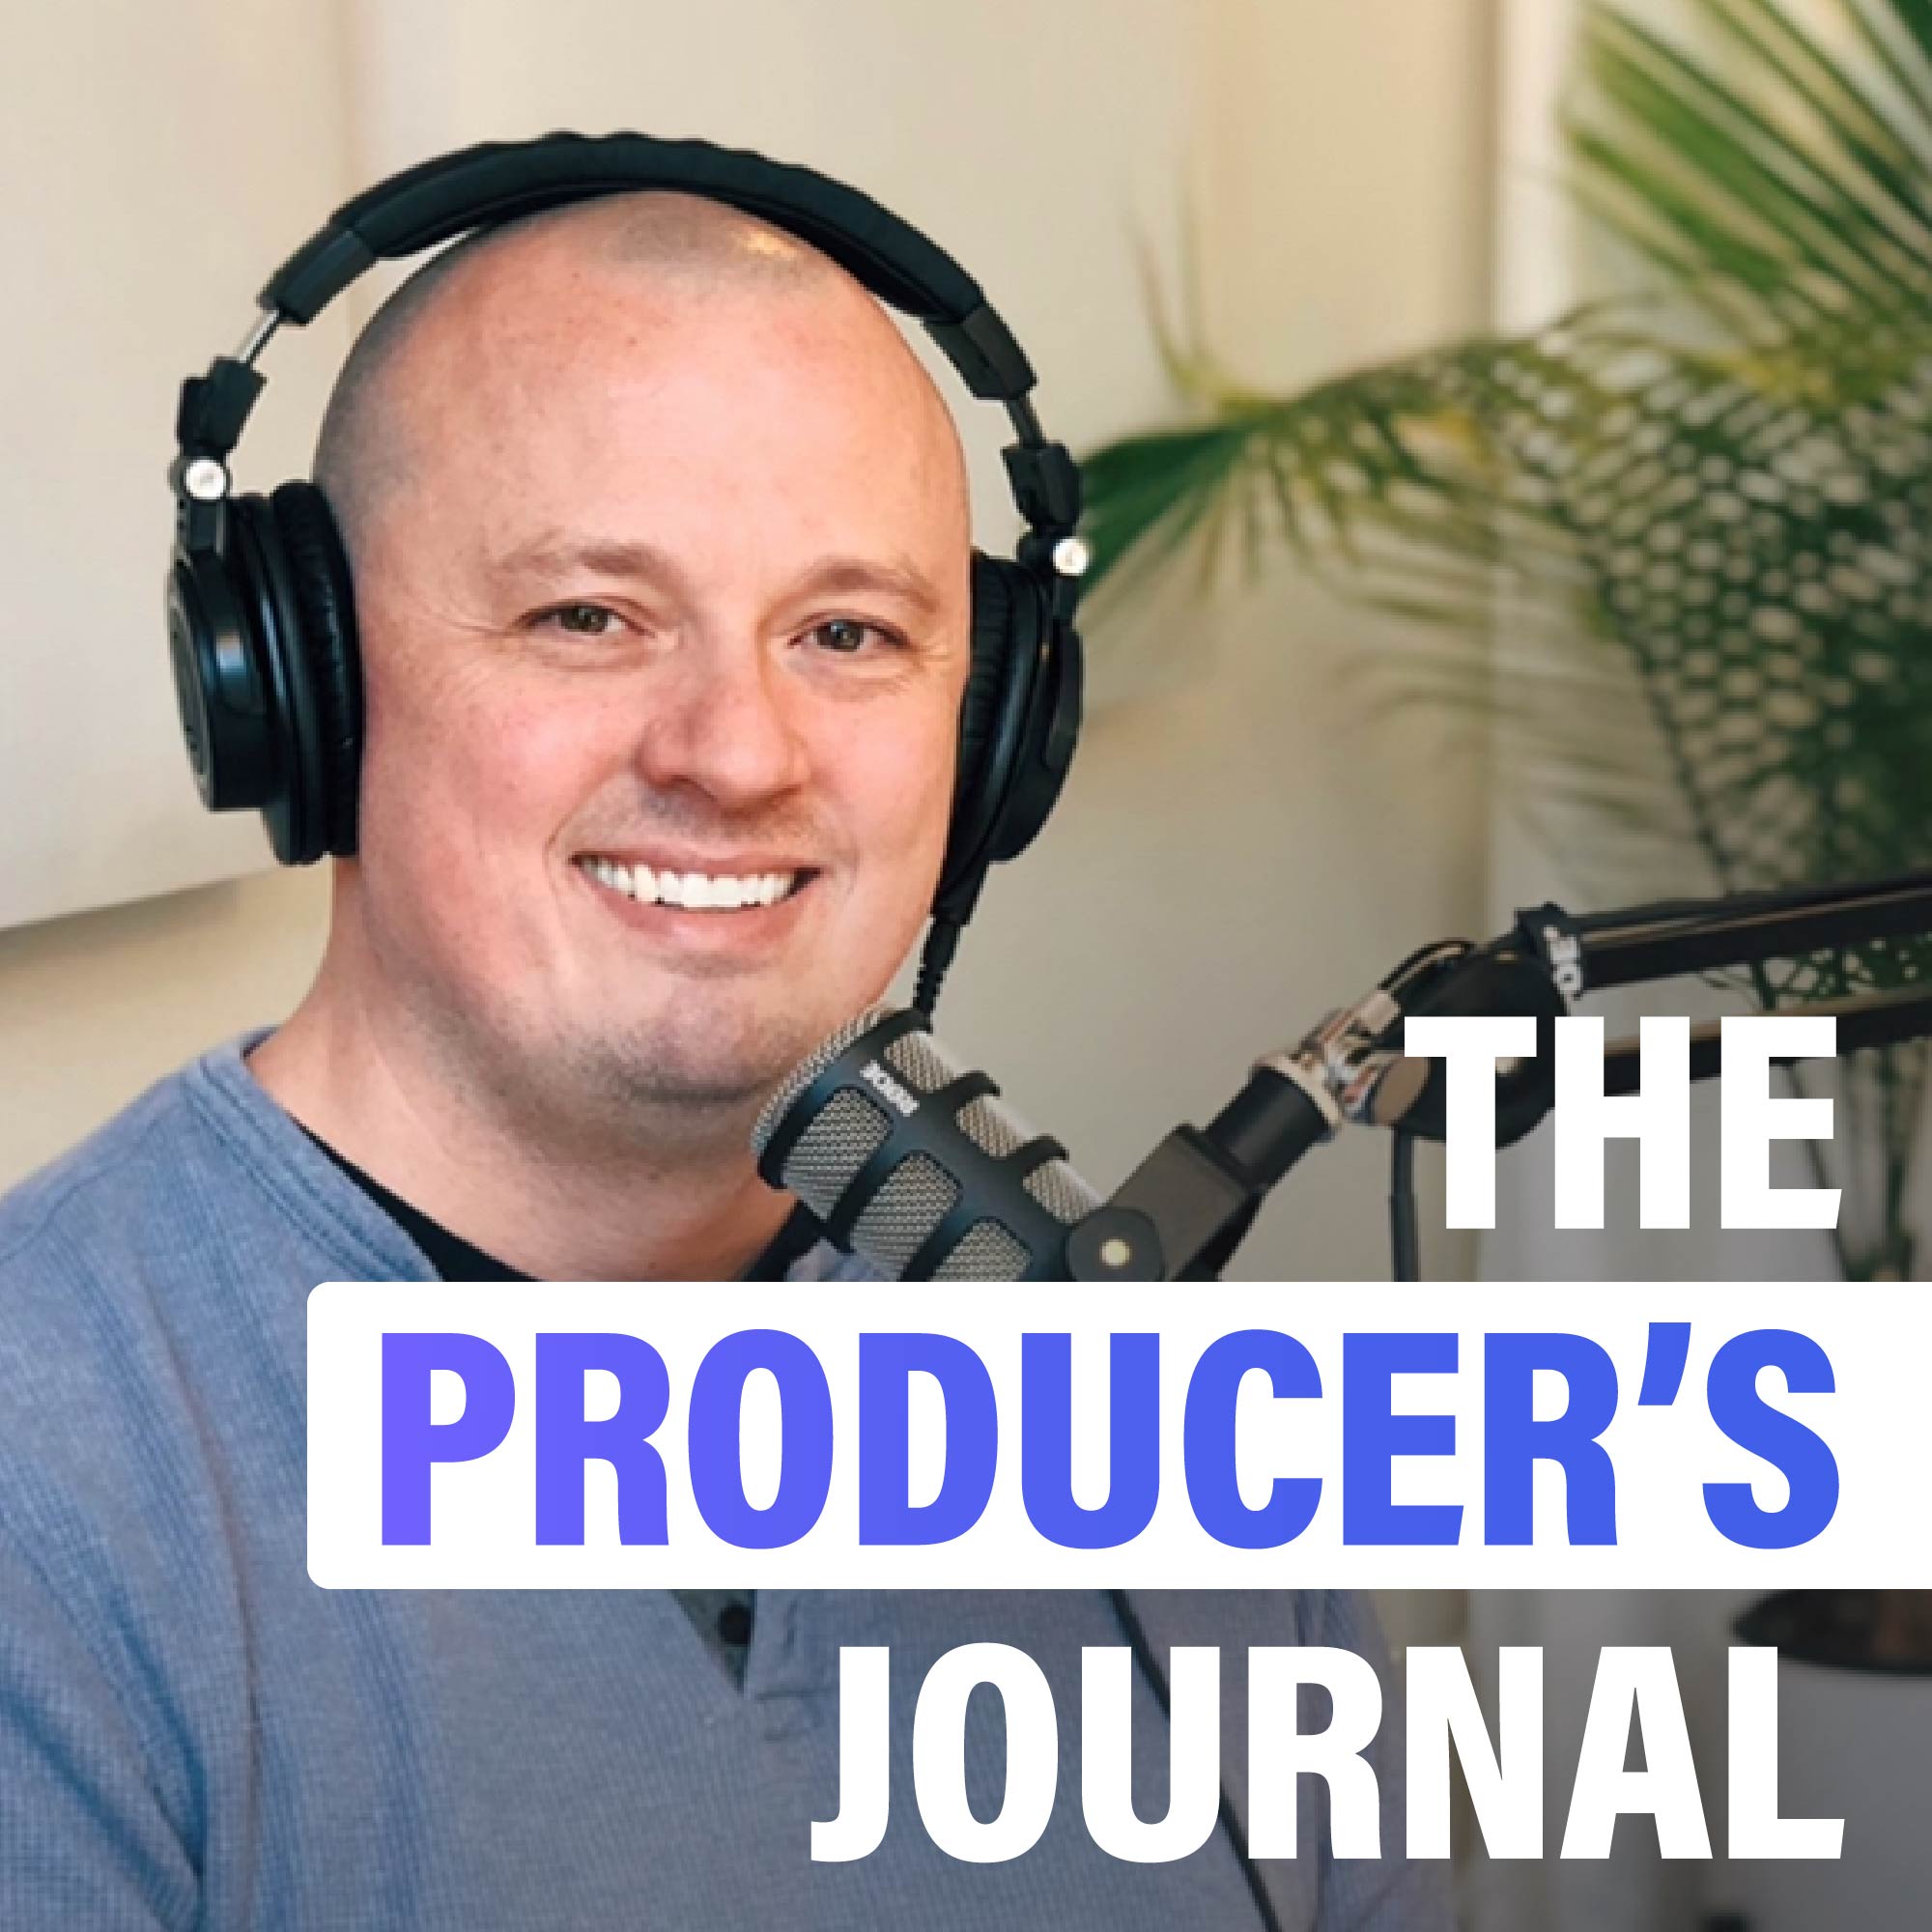 The Producer's Journal